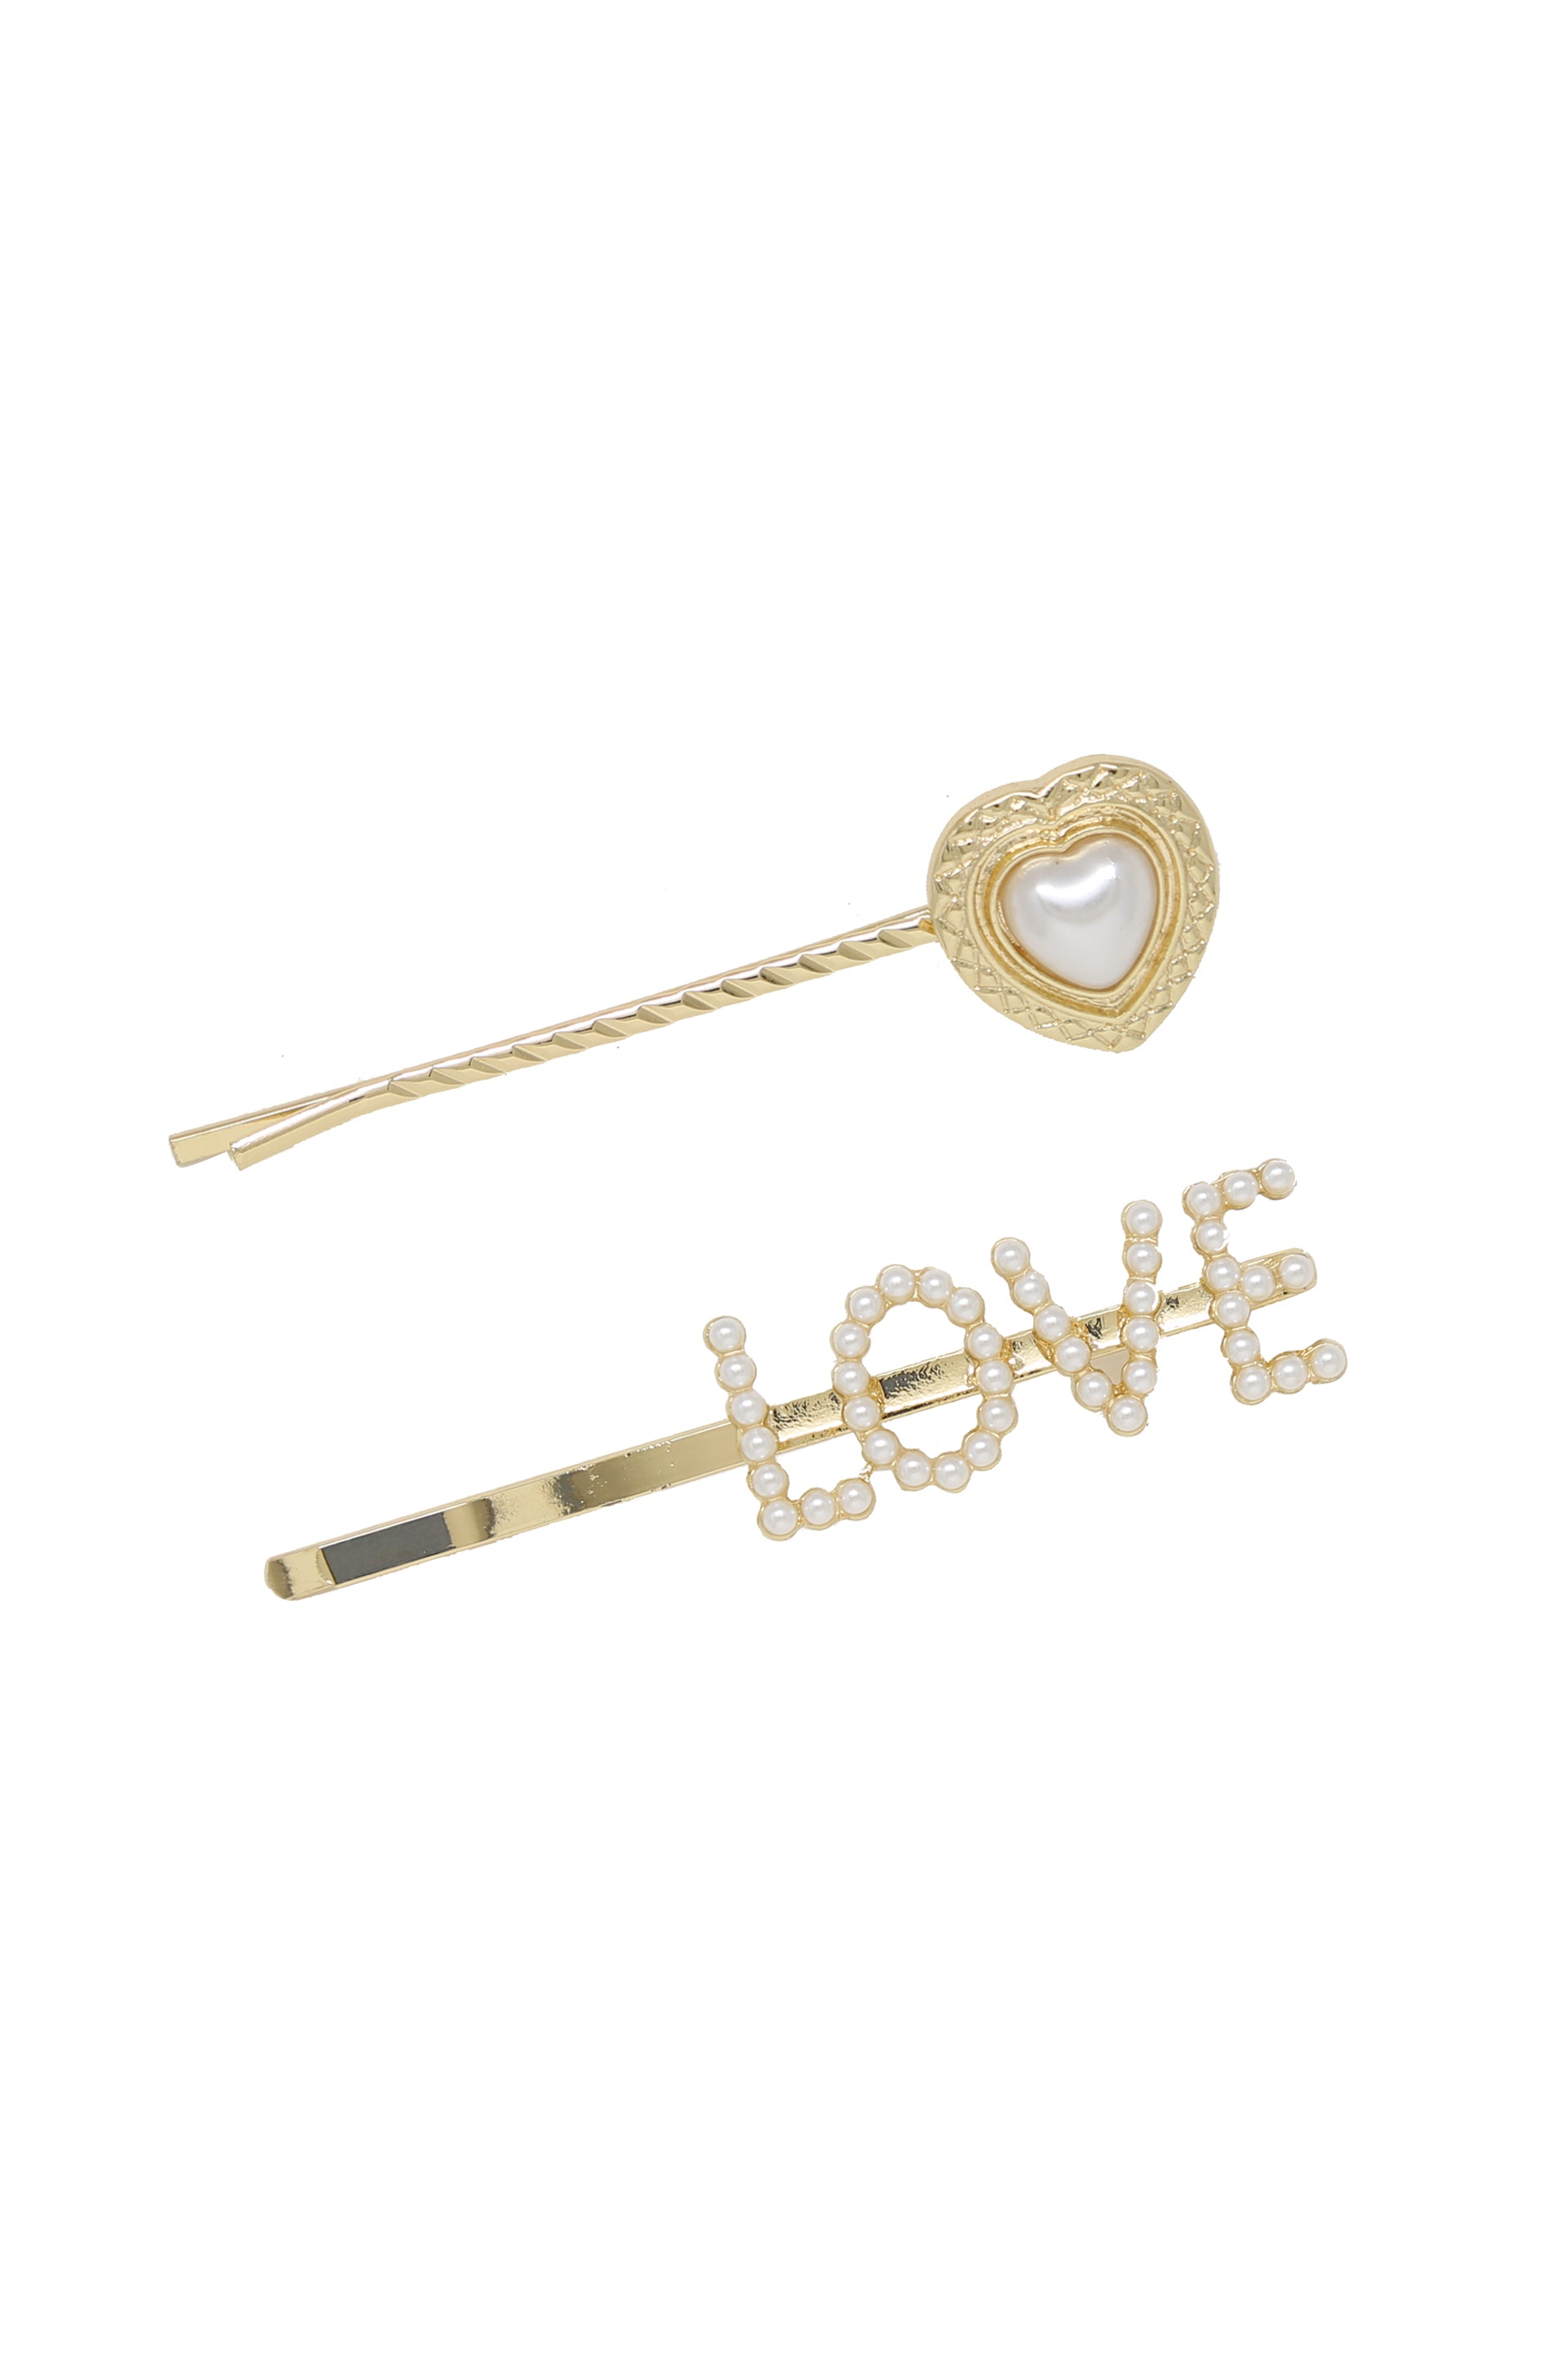 Pearl & Gold Love Heart Hair Pin Set on white background  